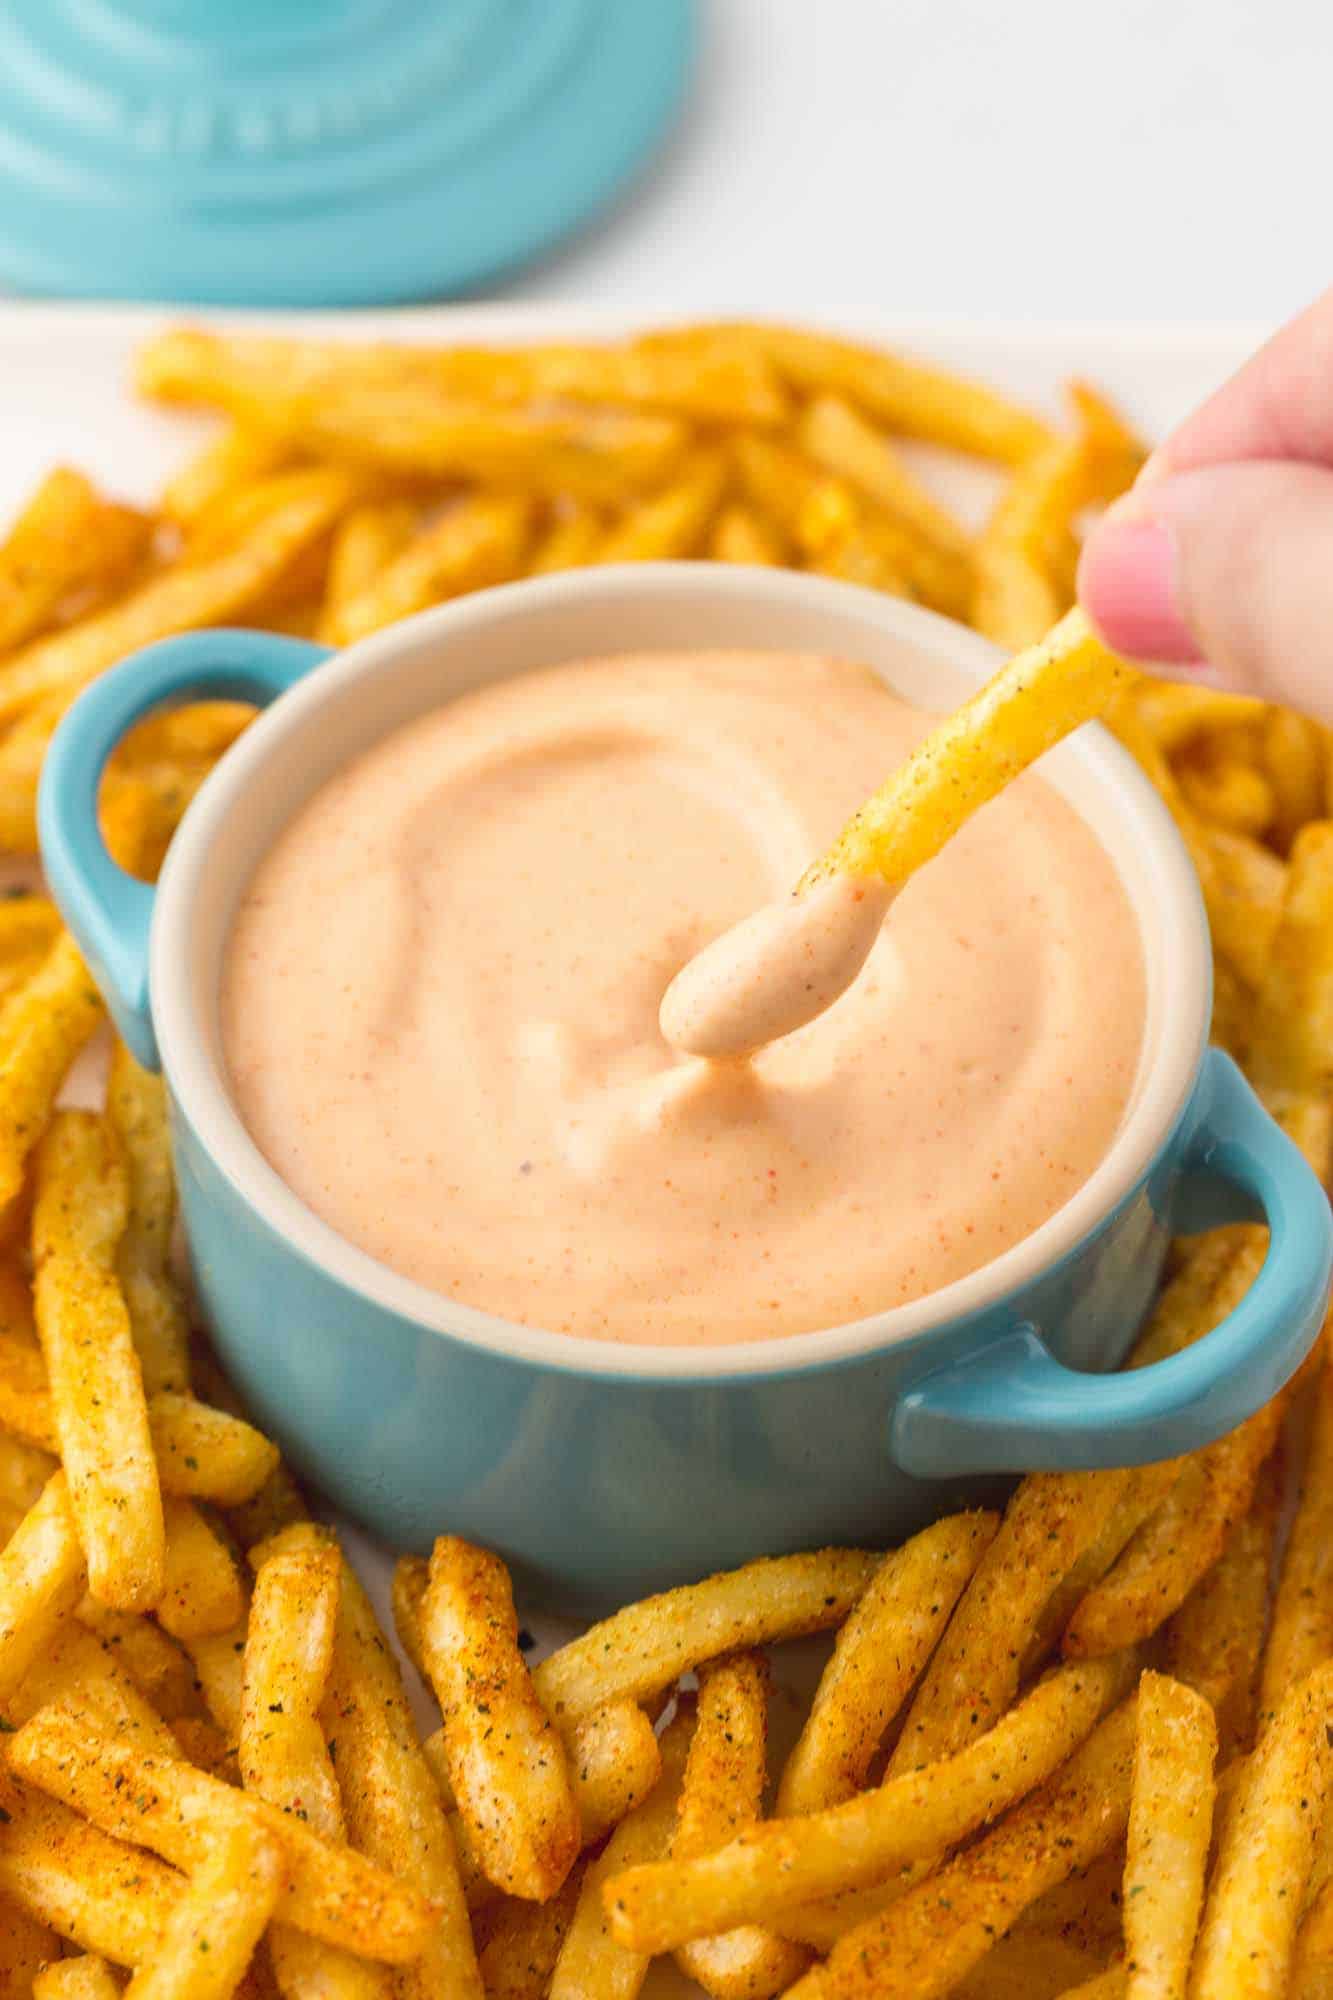 Dipping fresh fries in fry sauce that's served in a blue dish